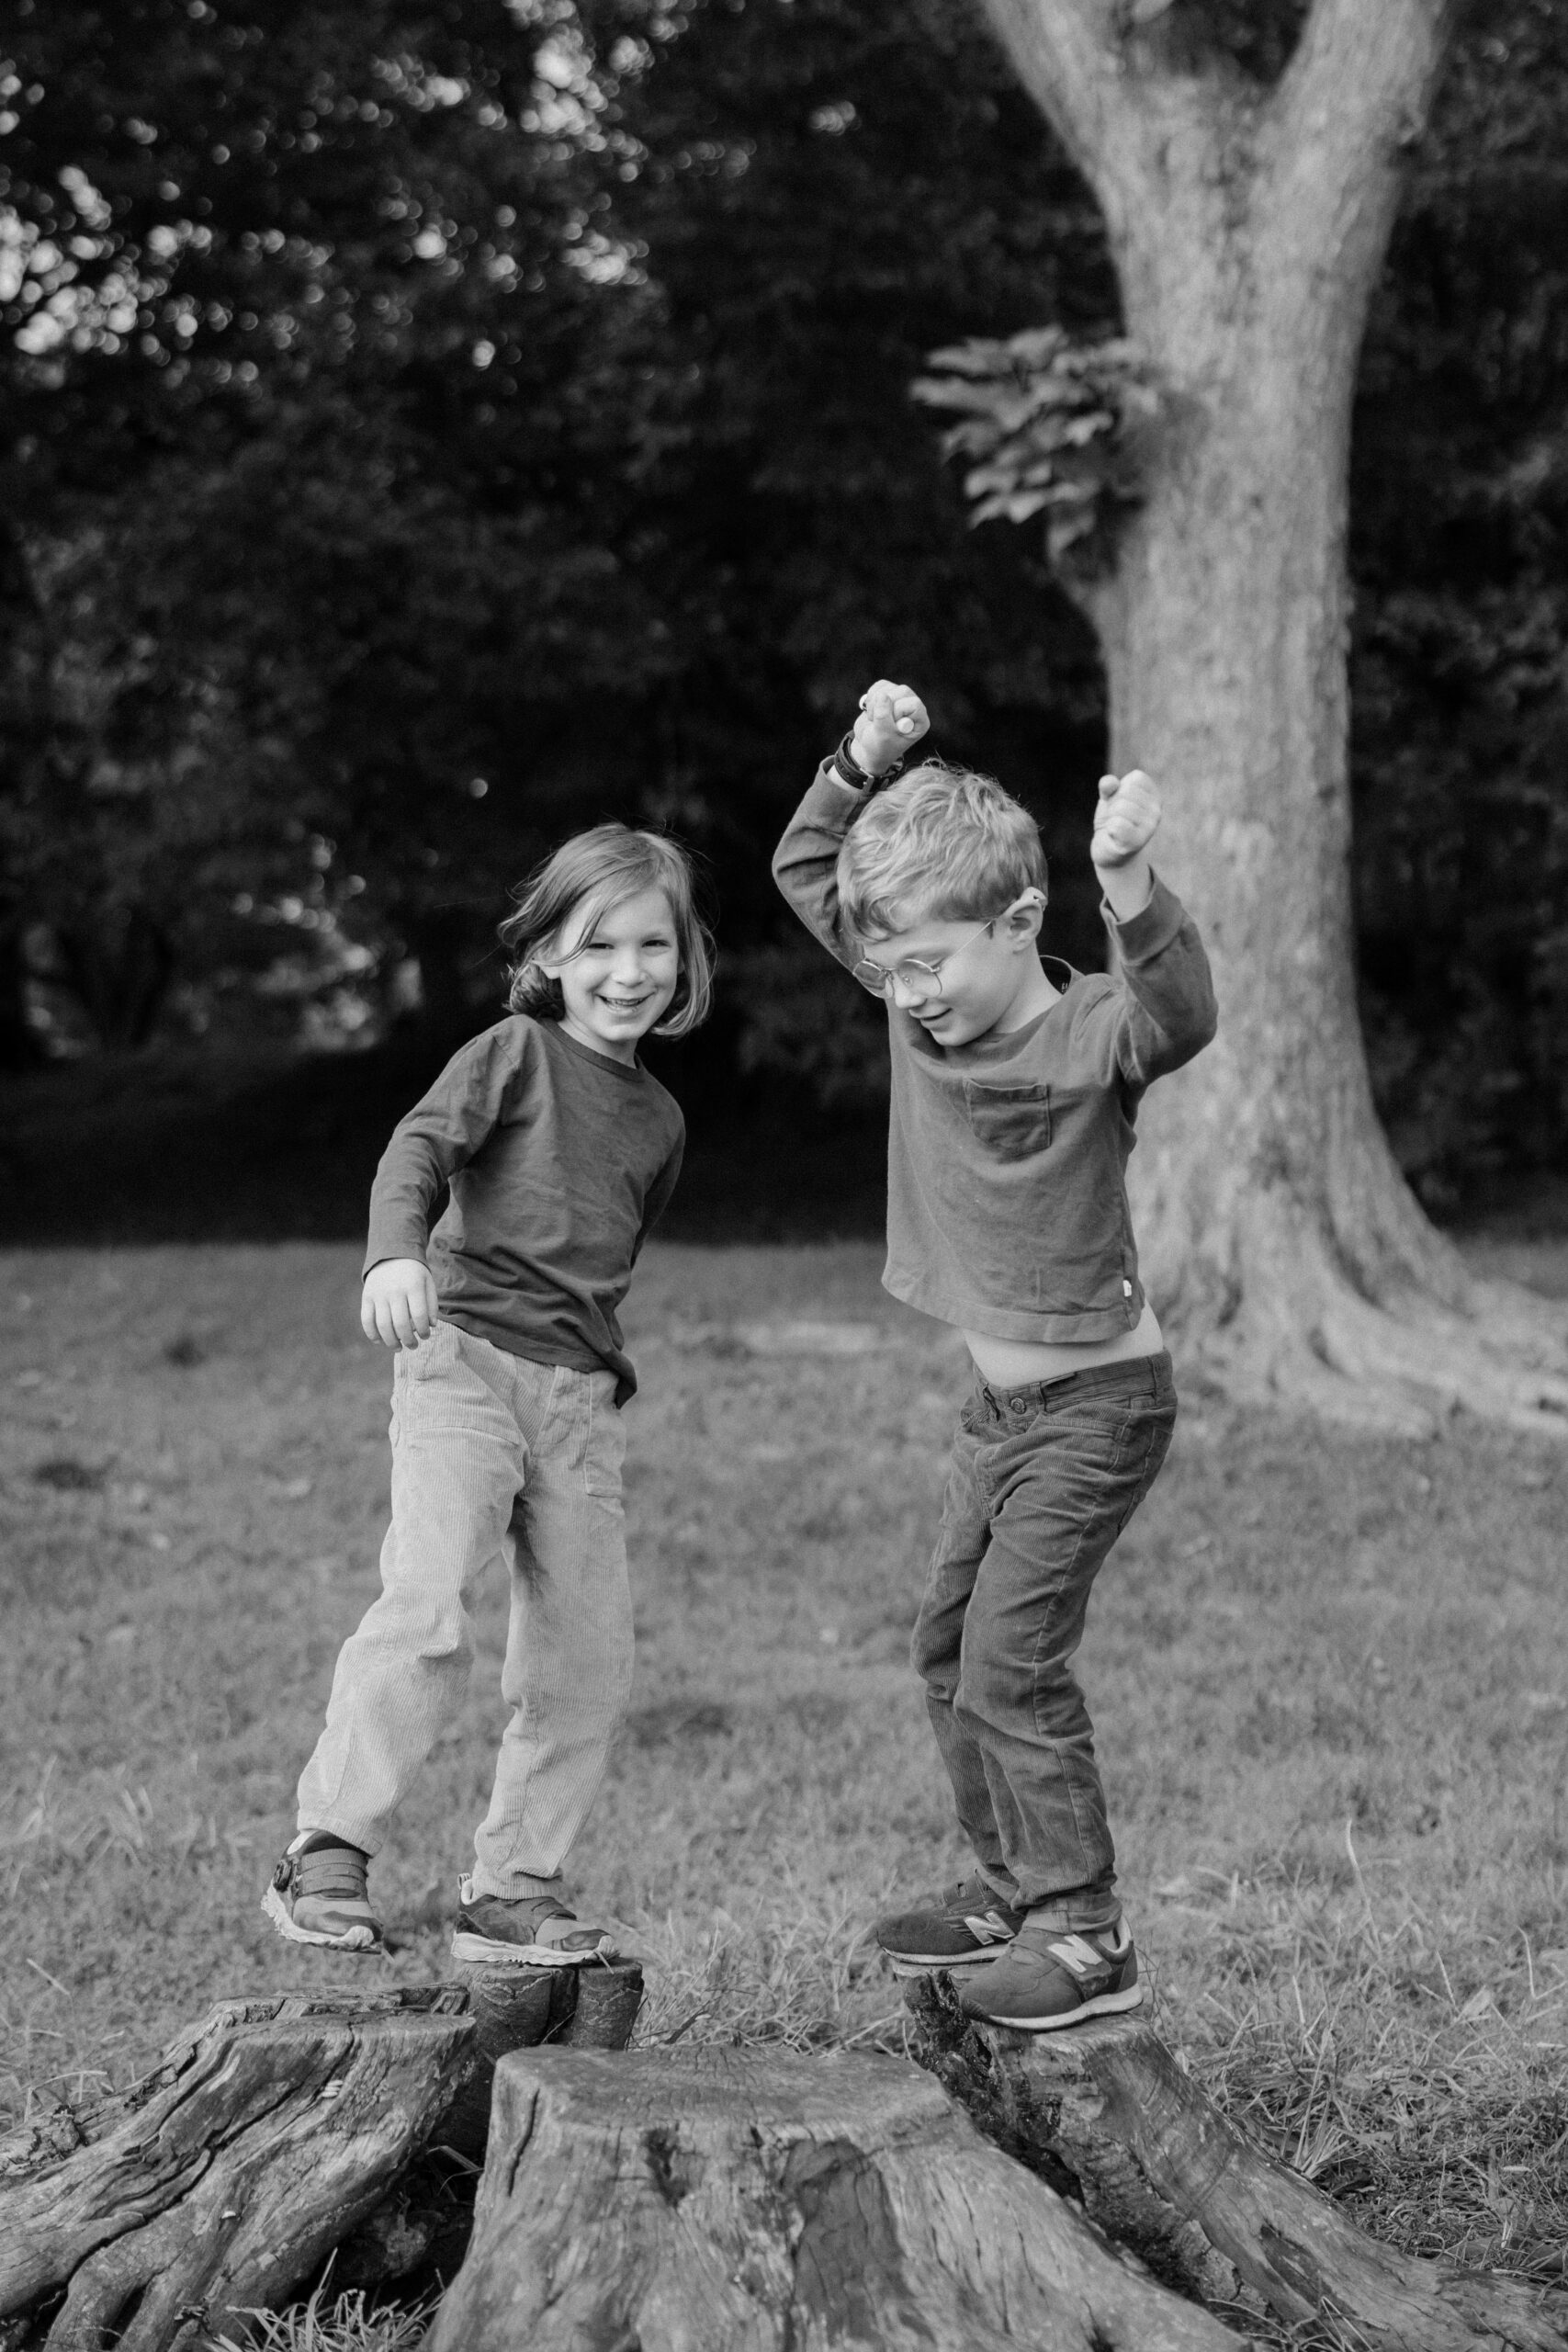 Loving brothers play on a stump together